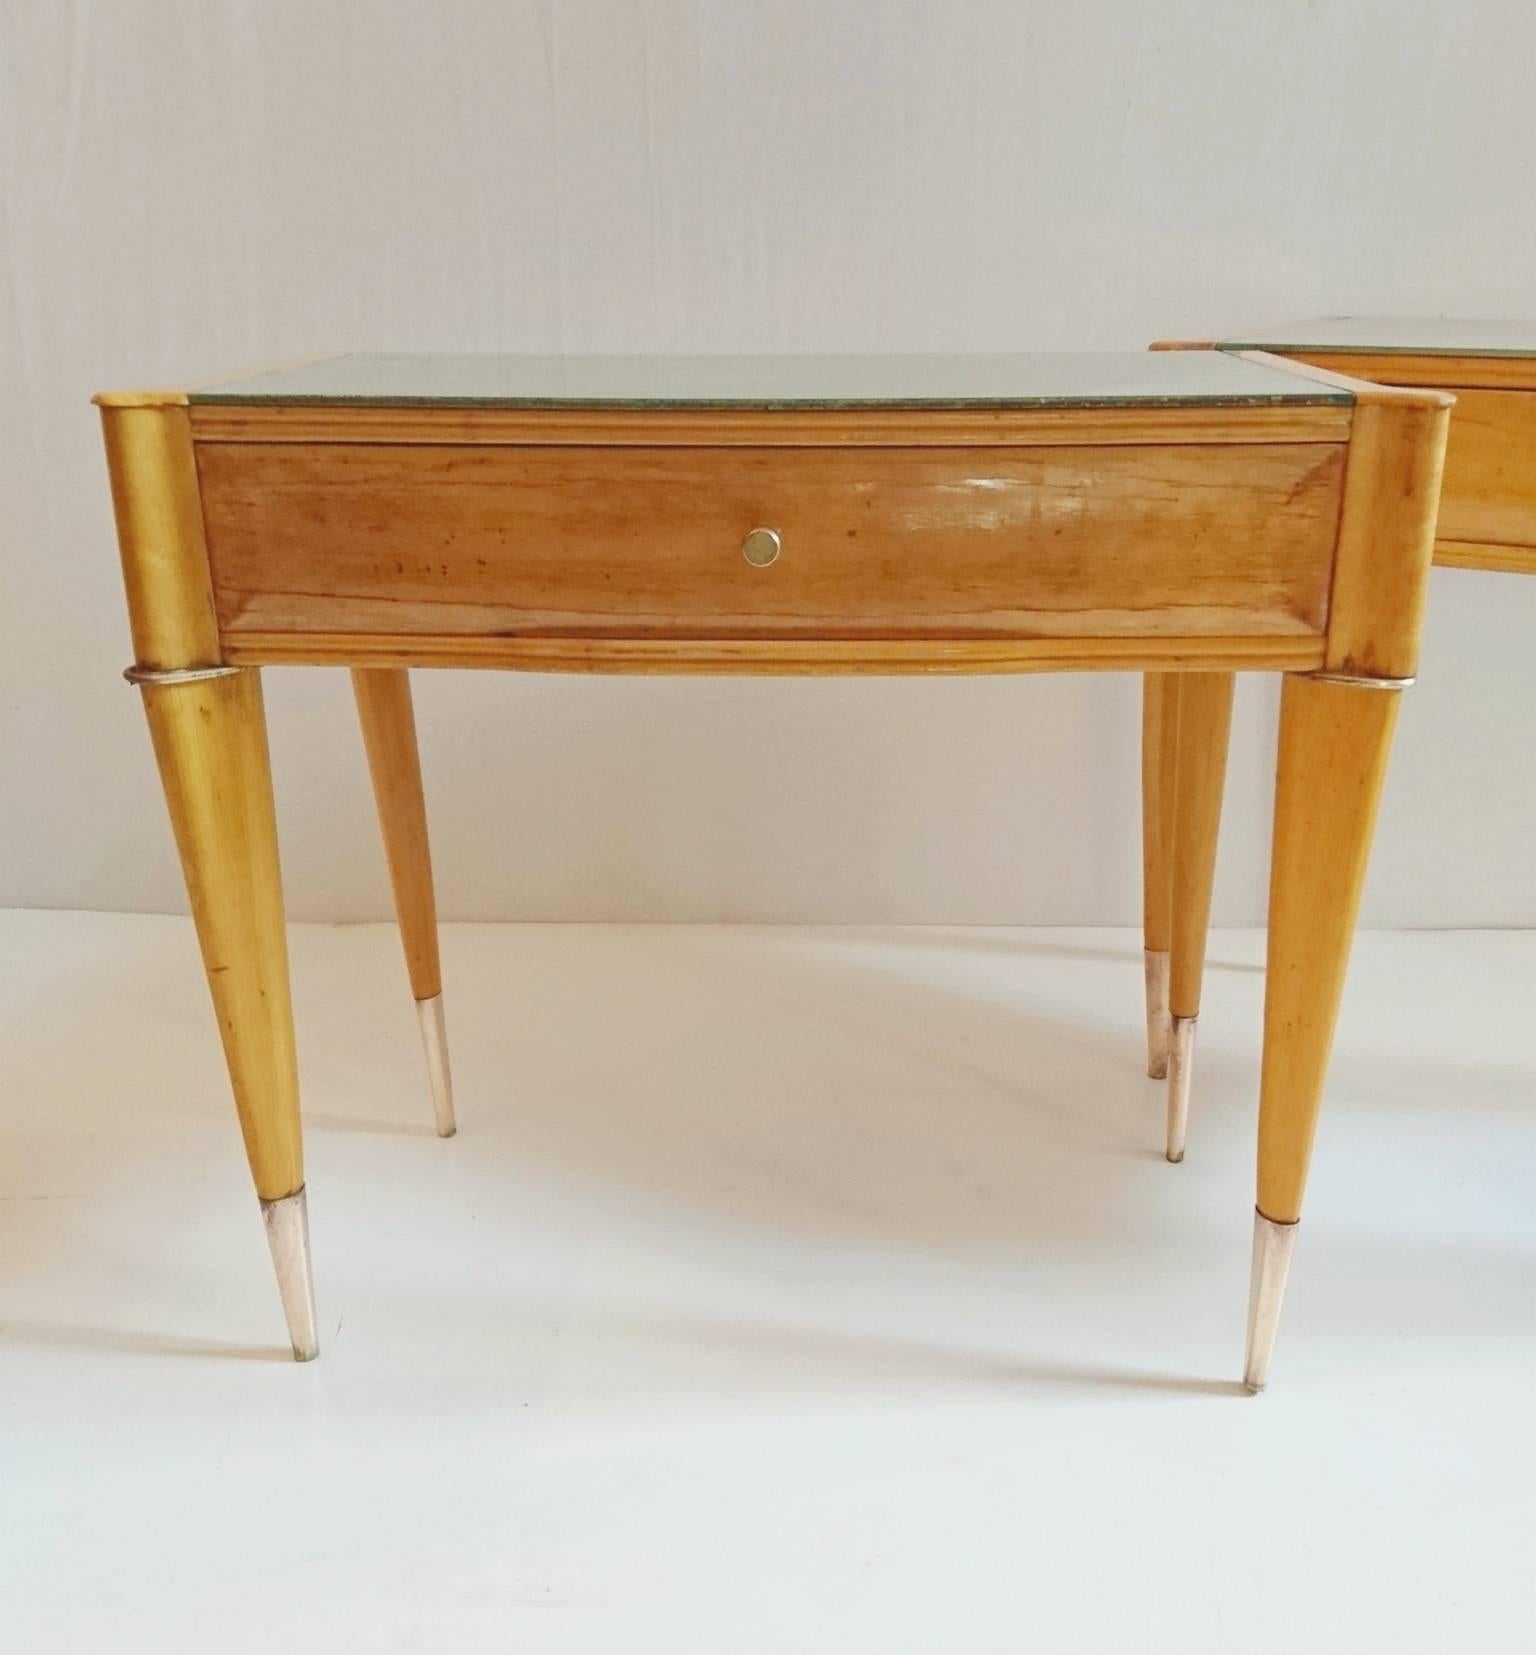 Elegantly shaped blond nightstands in maple and birhch with slightly silver/greenish glass tops with brass details. Has cone shaped delicate legs with brass finishes. Will be delivered professionally restored and polished upon sale.